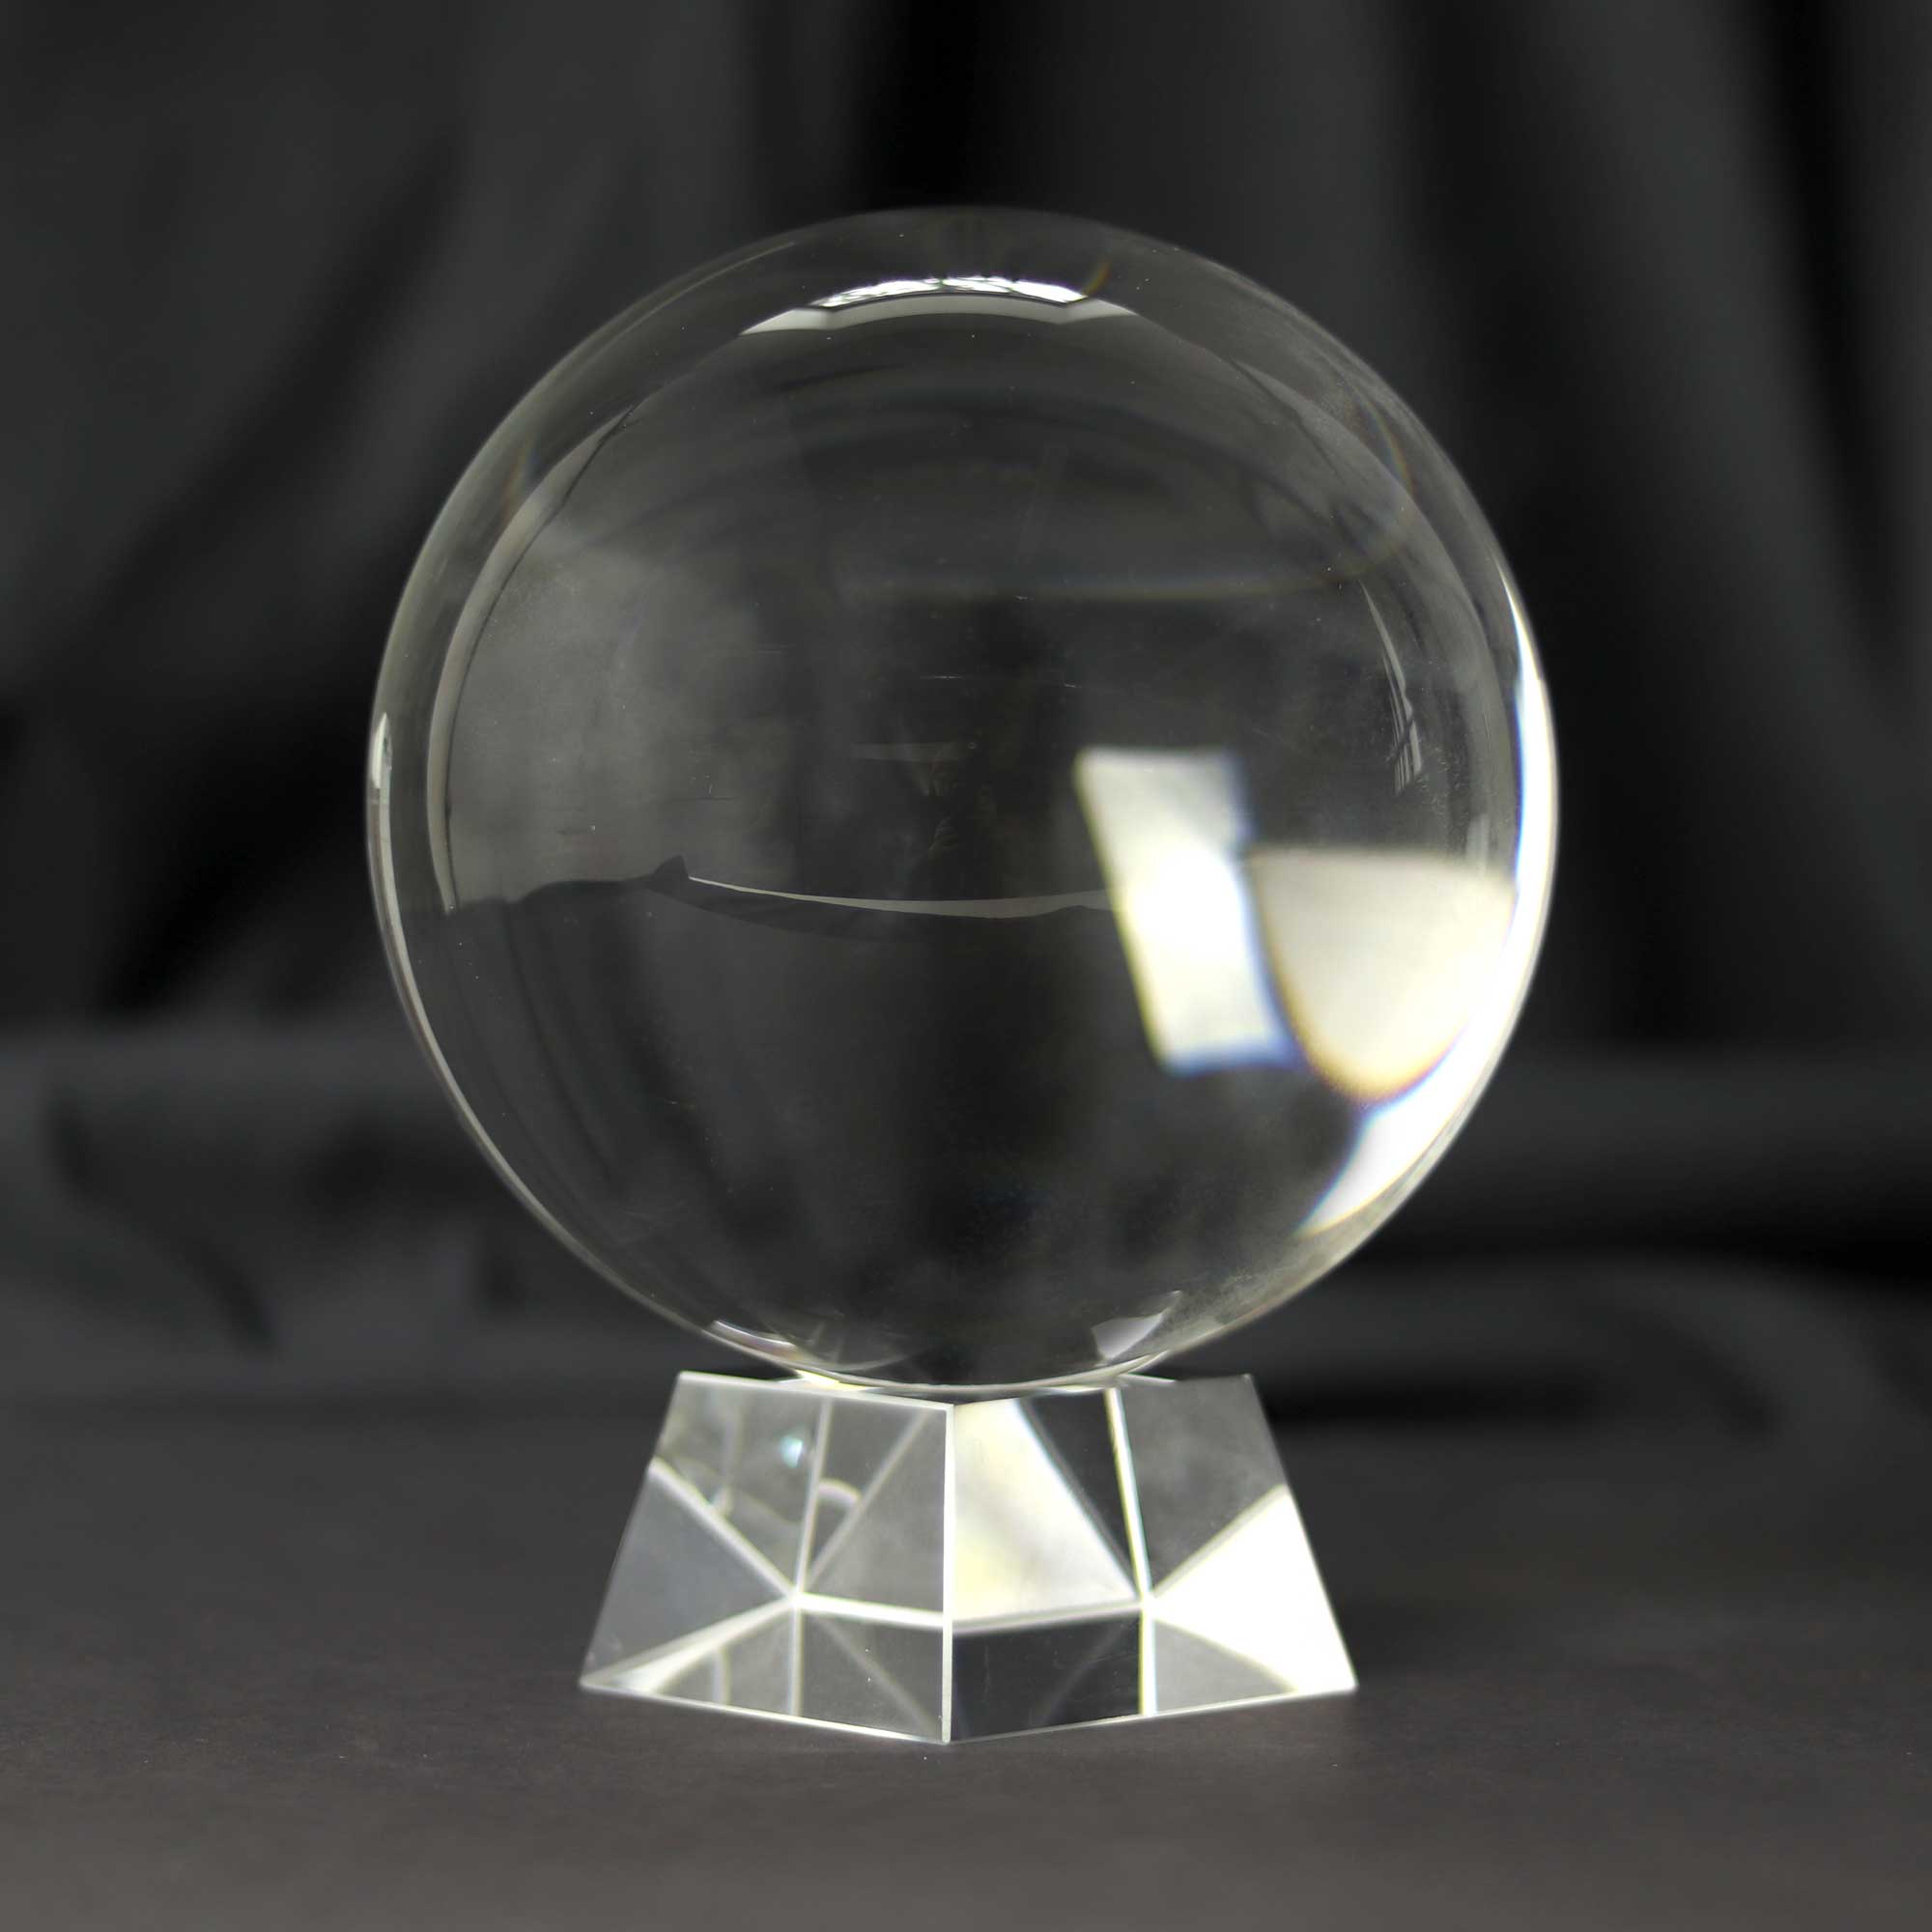 Convention Crystal Hi Ball - Set of 6 – Everlastly